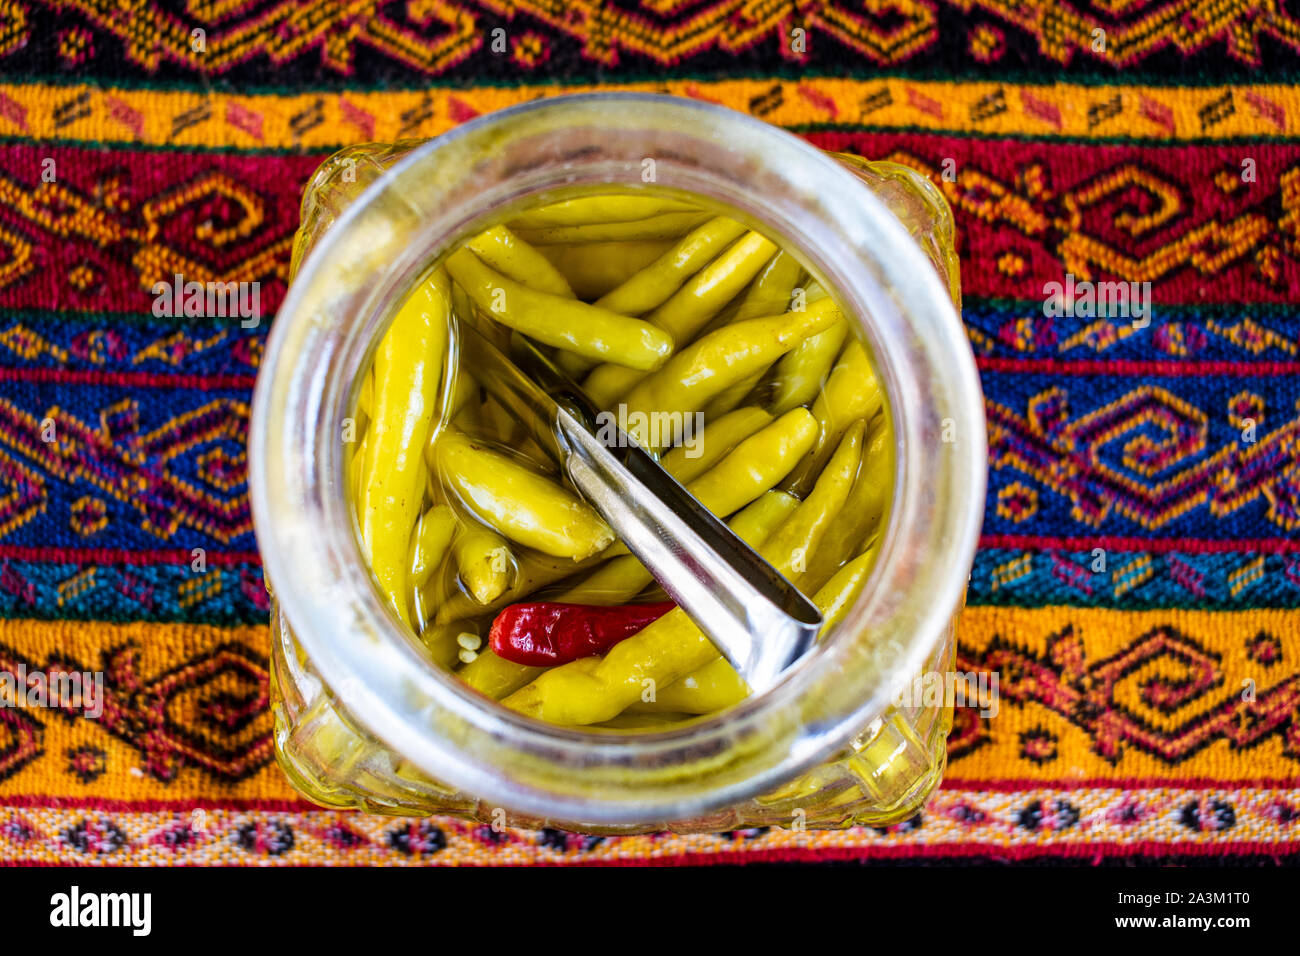 Istanbul, Turkey: Middle Eastern food and lifestyle, a jar of spicy green chillies and hot pepper on a damask tablecloth Stock Photo